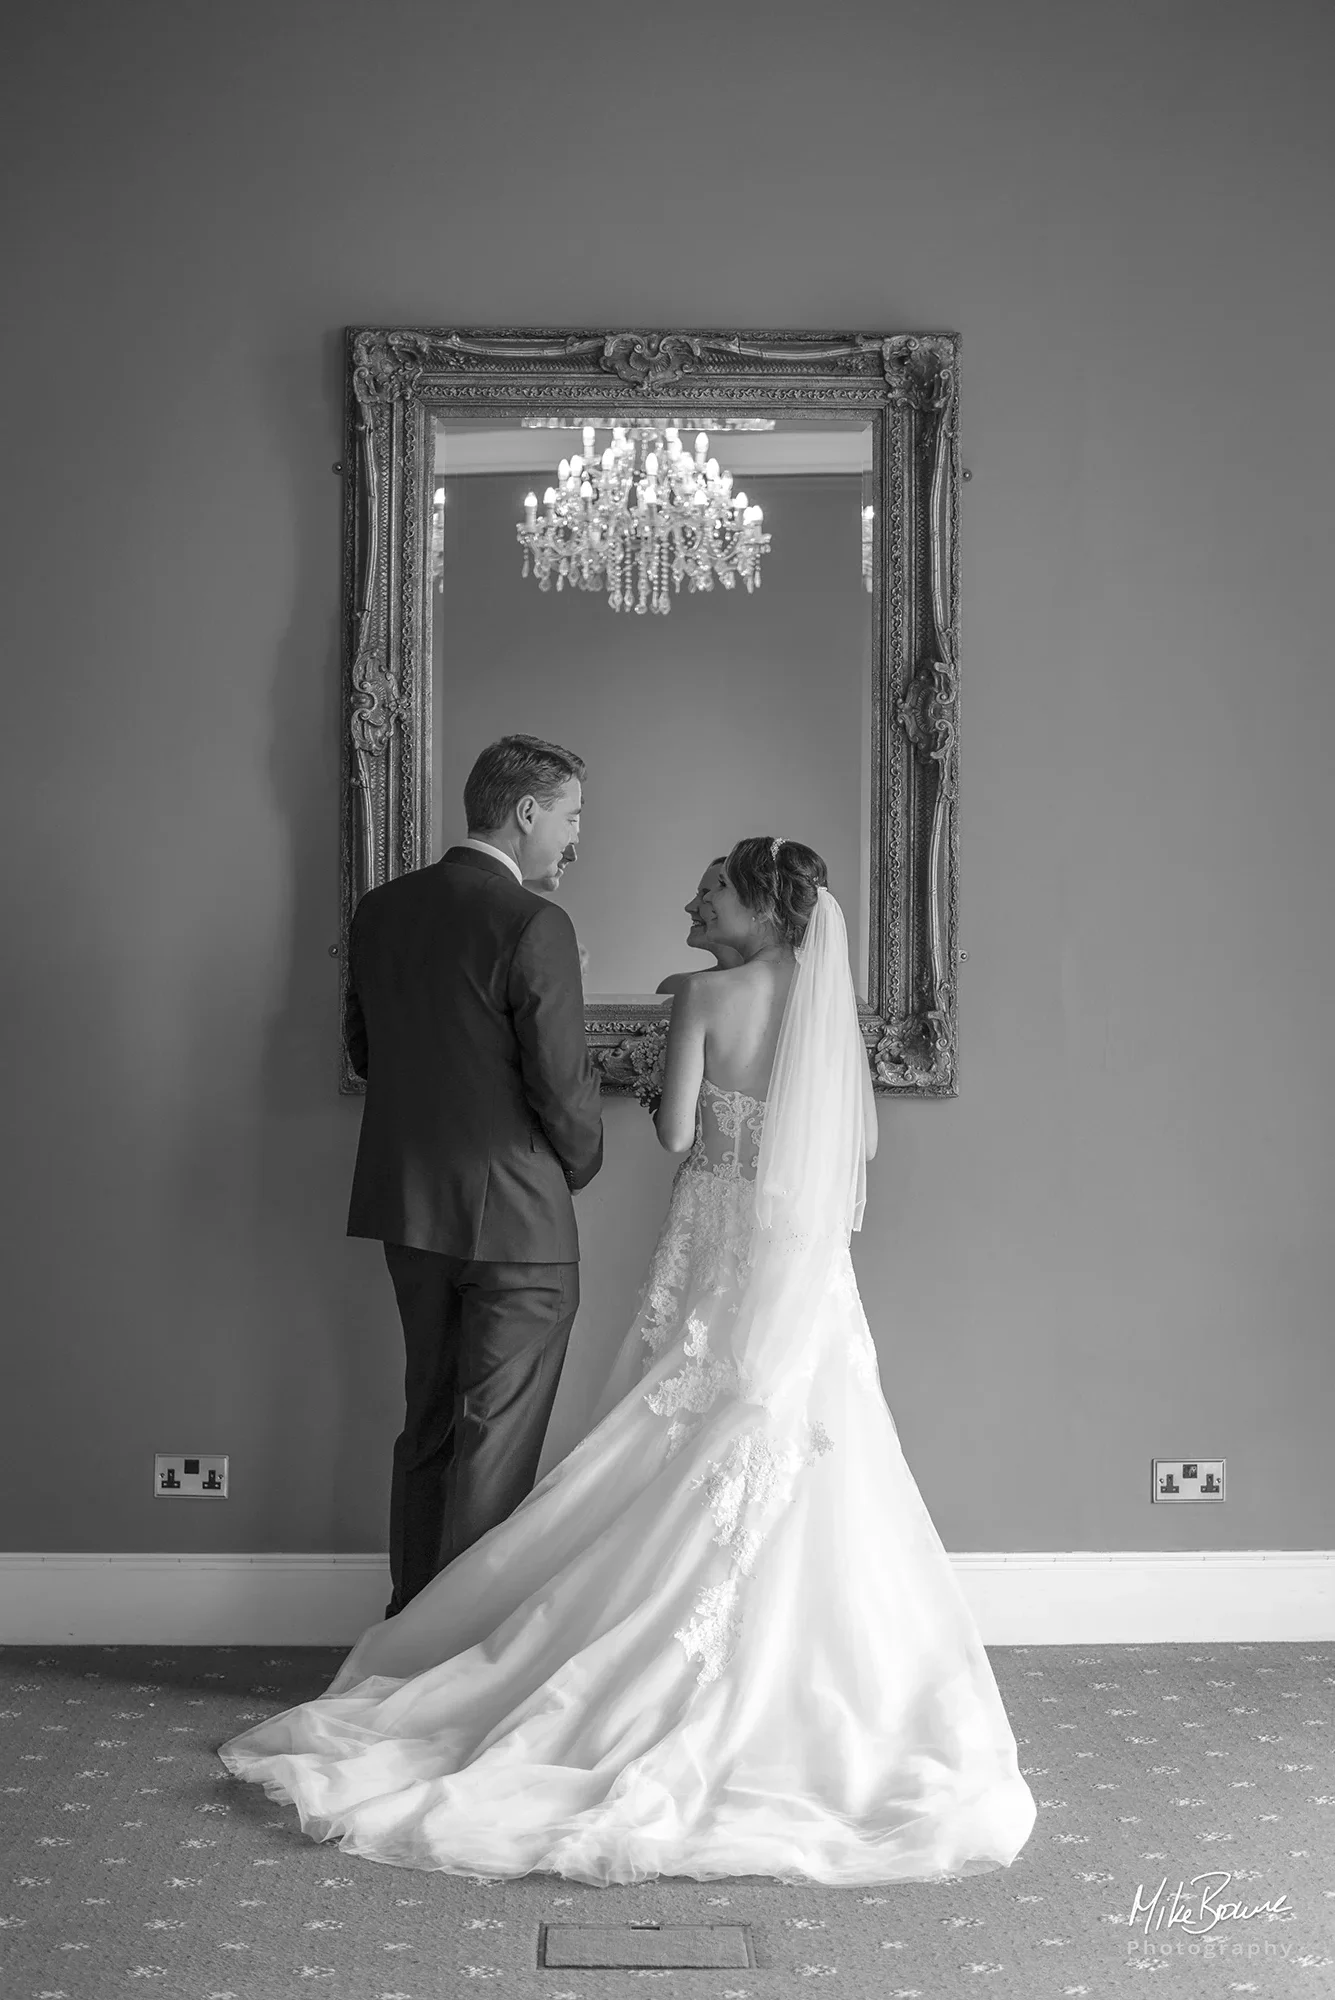 Newly wedded couple looking at each other in front of a large wall mirror with reflection of a chandelier